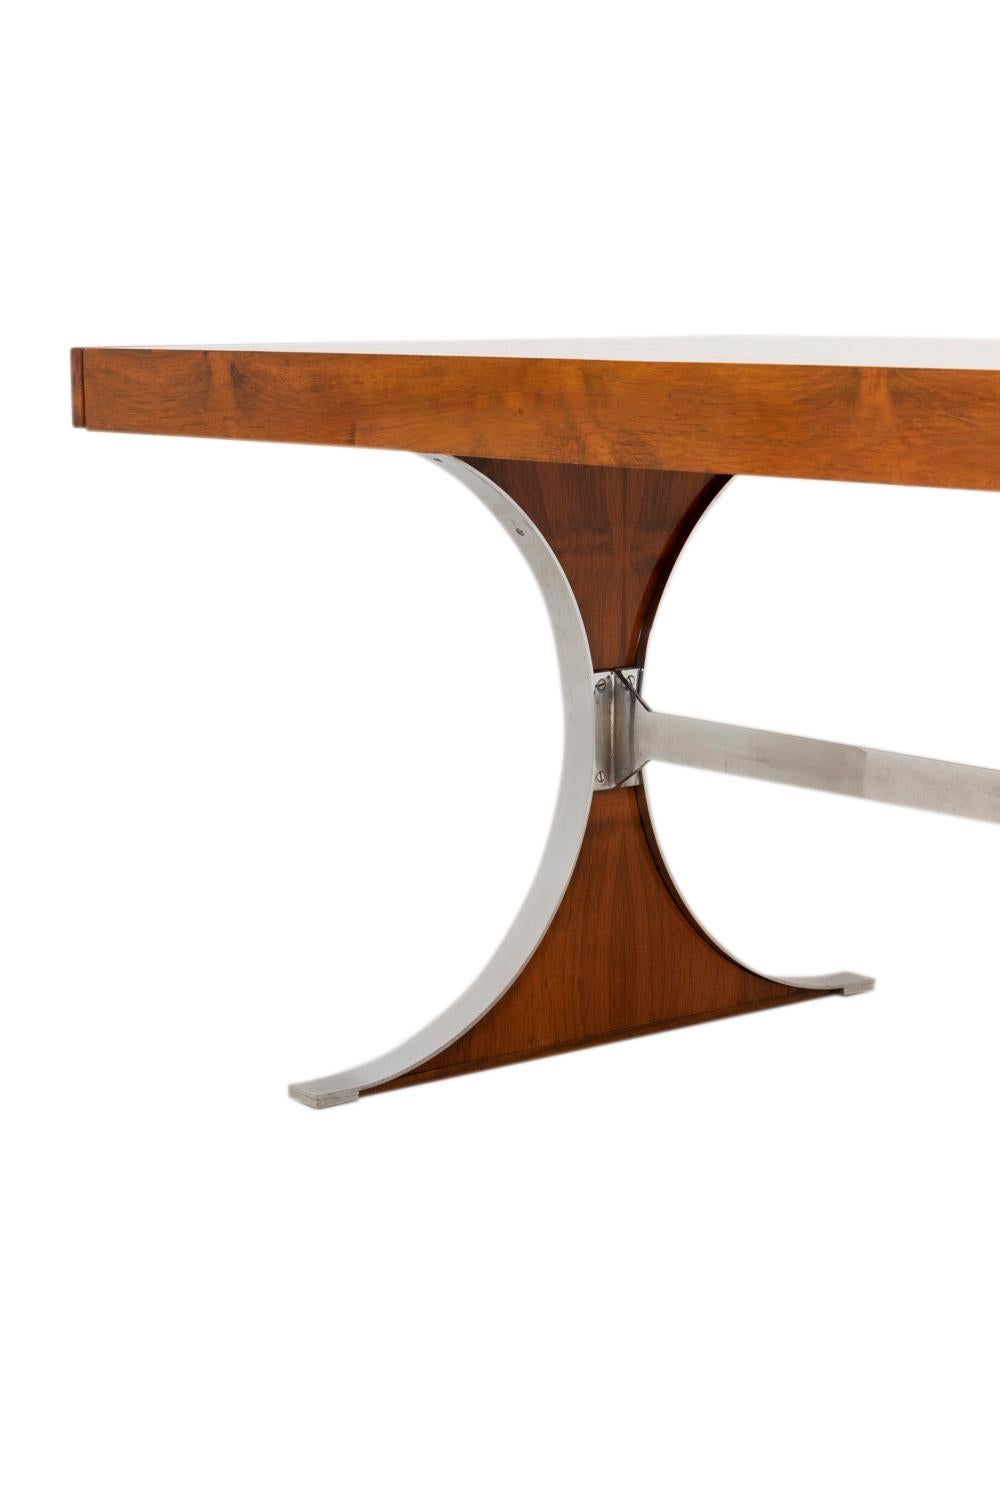 R.-J. Caillette, Sylvie Table, Rosewood and Stainless Steel, Charron Ed., 1961 6